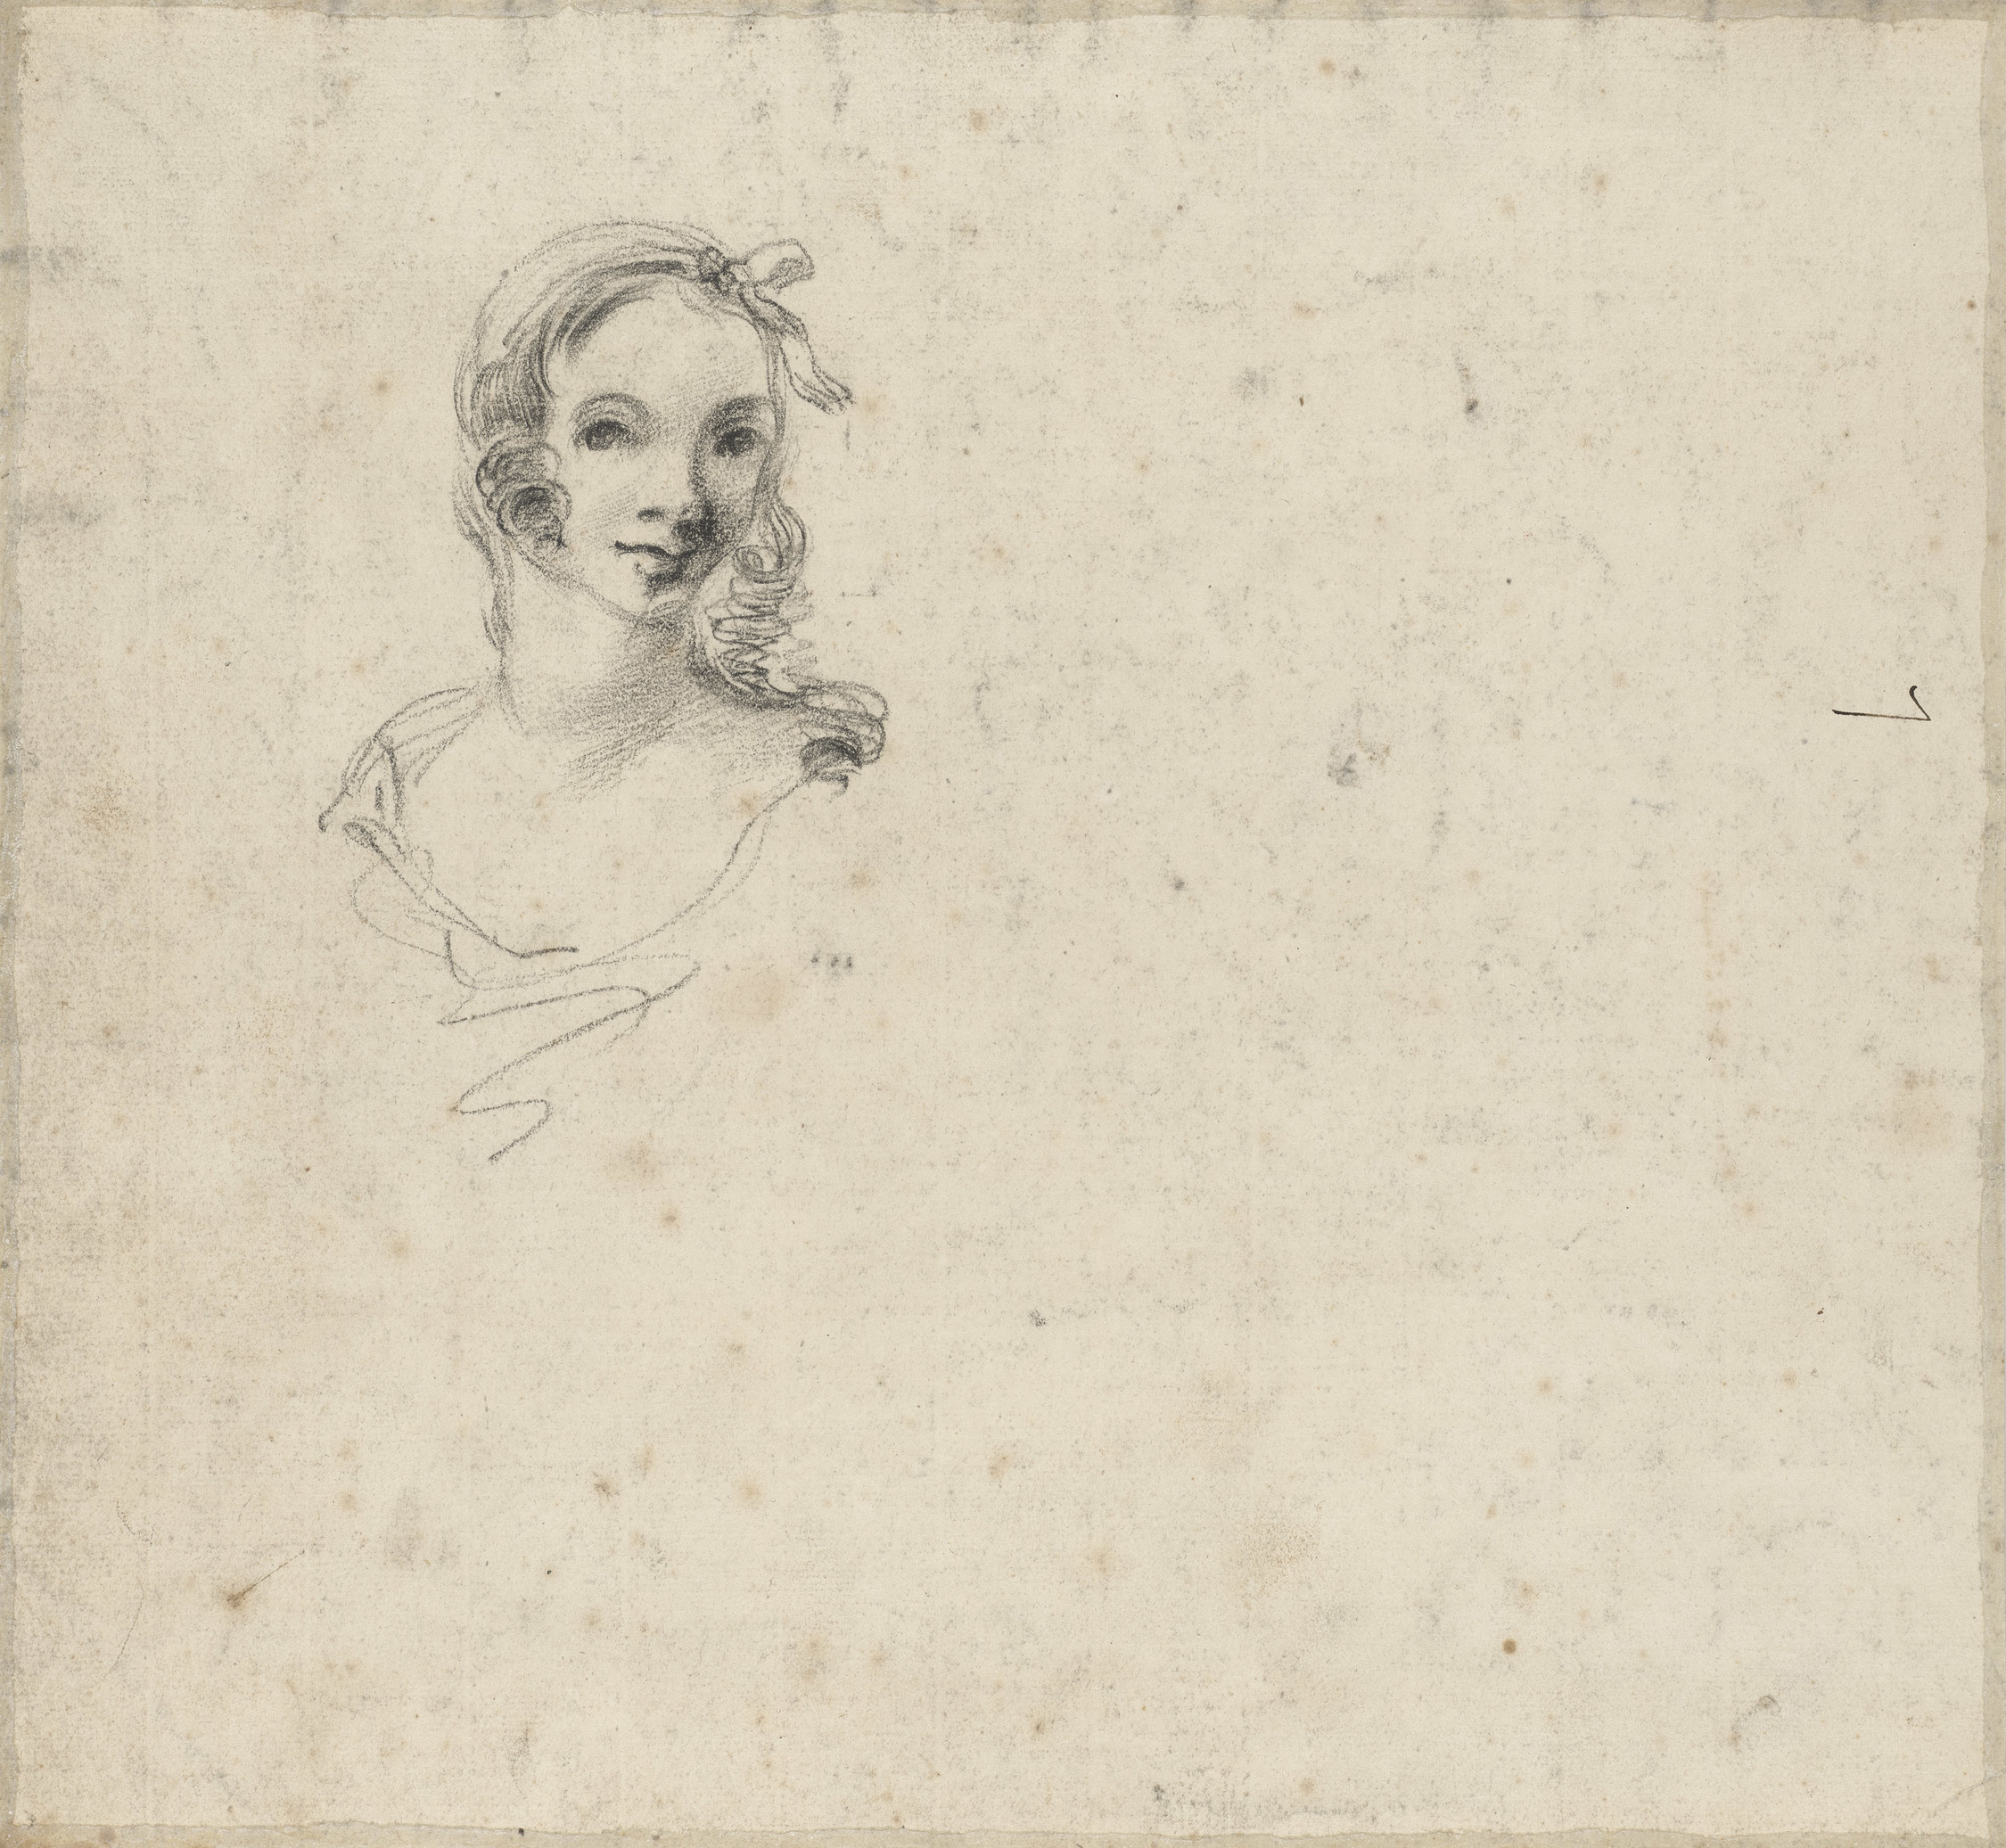 A black chalk drawing of a landscape with trees, burdock plants and a&nbsp;pond in the middle ground. On the verso, a black chalk portrait drawing of the head of a young girl, and the figure '7' in ink.&nbsp;It is tempting to think that the figure study c